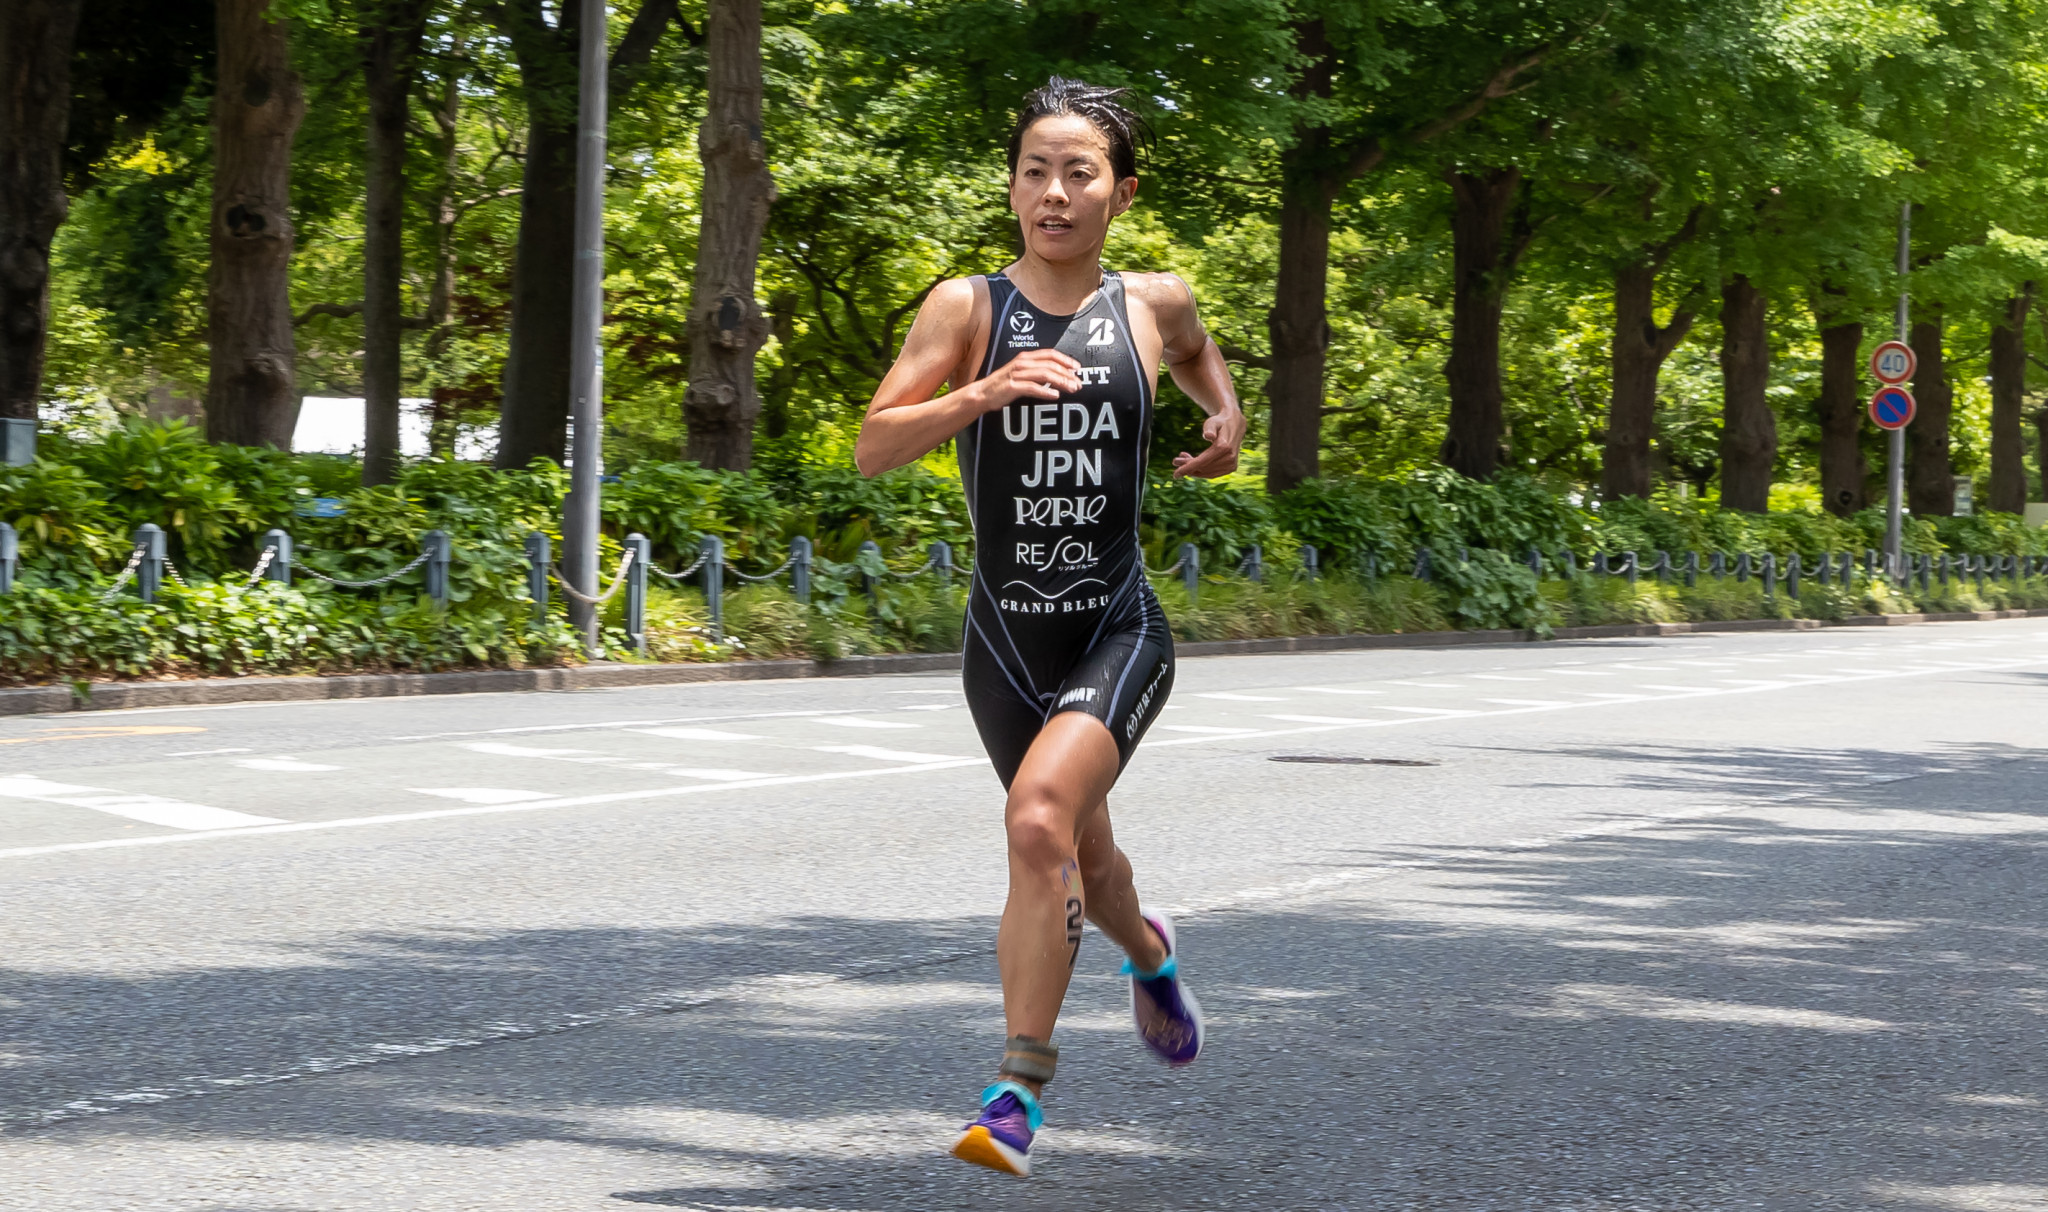 Japan's Ai Ueda was the women's elite duathlon world champion in 2013 ©Getty Images